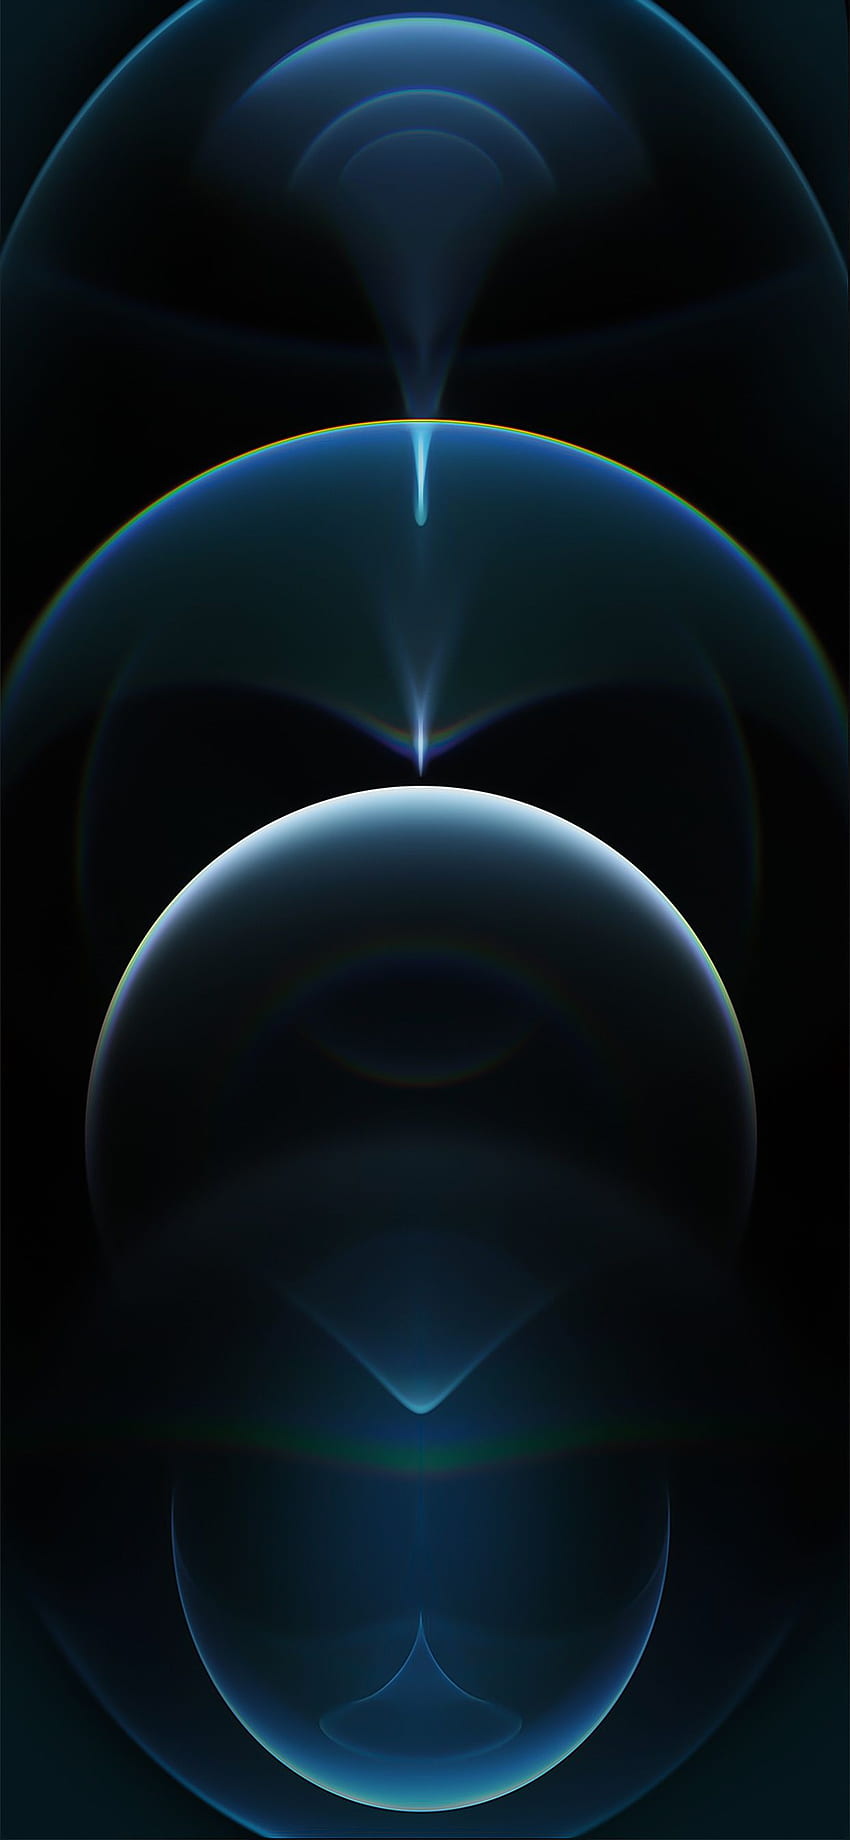 the iPhone 12 Pro, 14 Pro Max HD phone wallpaper